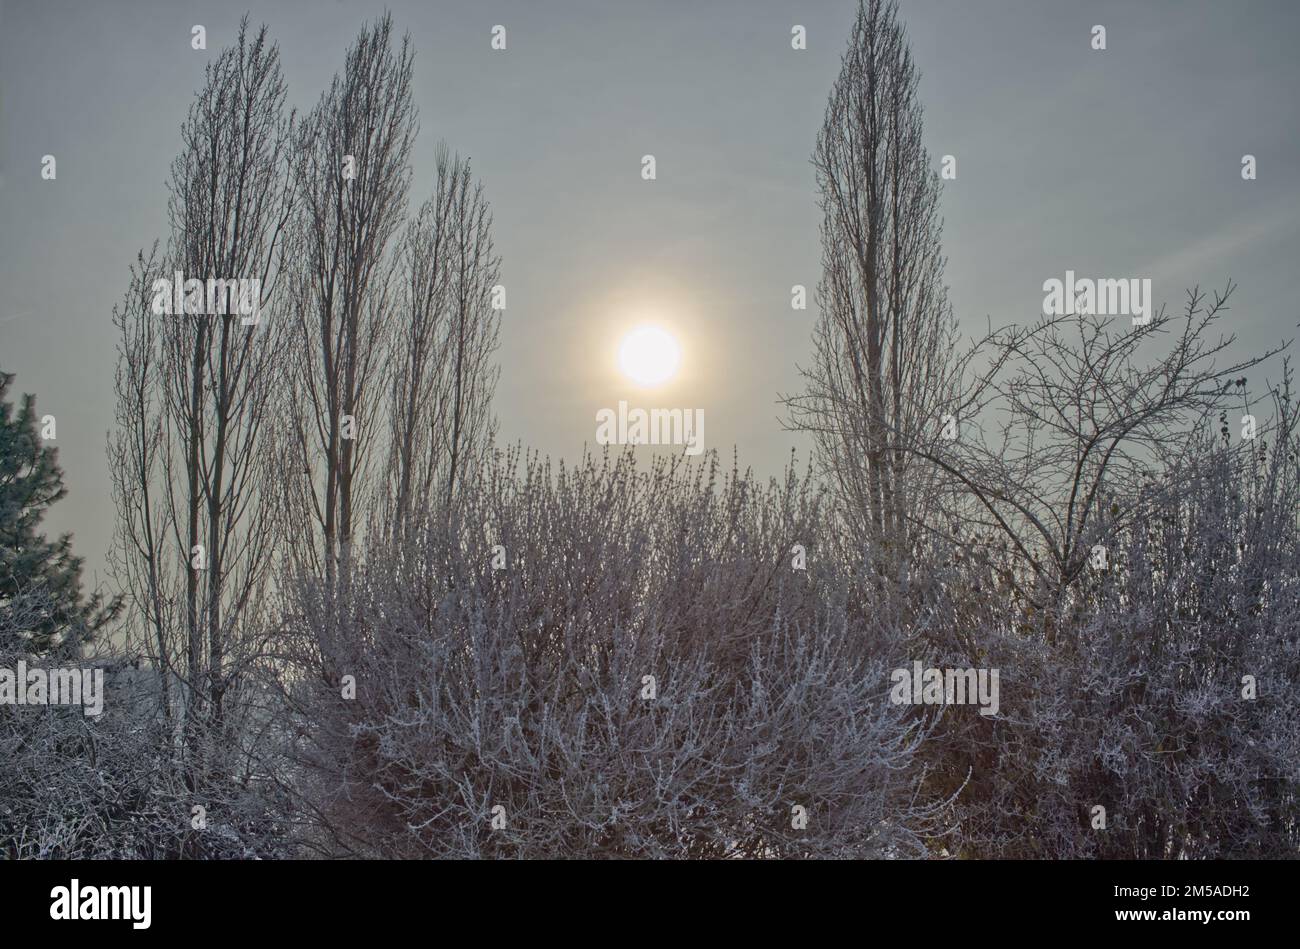 winter scenery of snow and ice covered trees and bushes against a bright but hazy sky with the shining sun at the center of the image Stock Photo